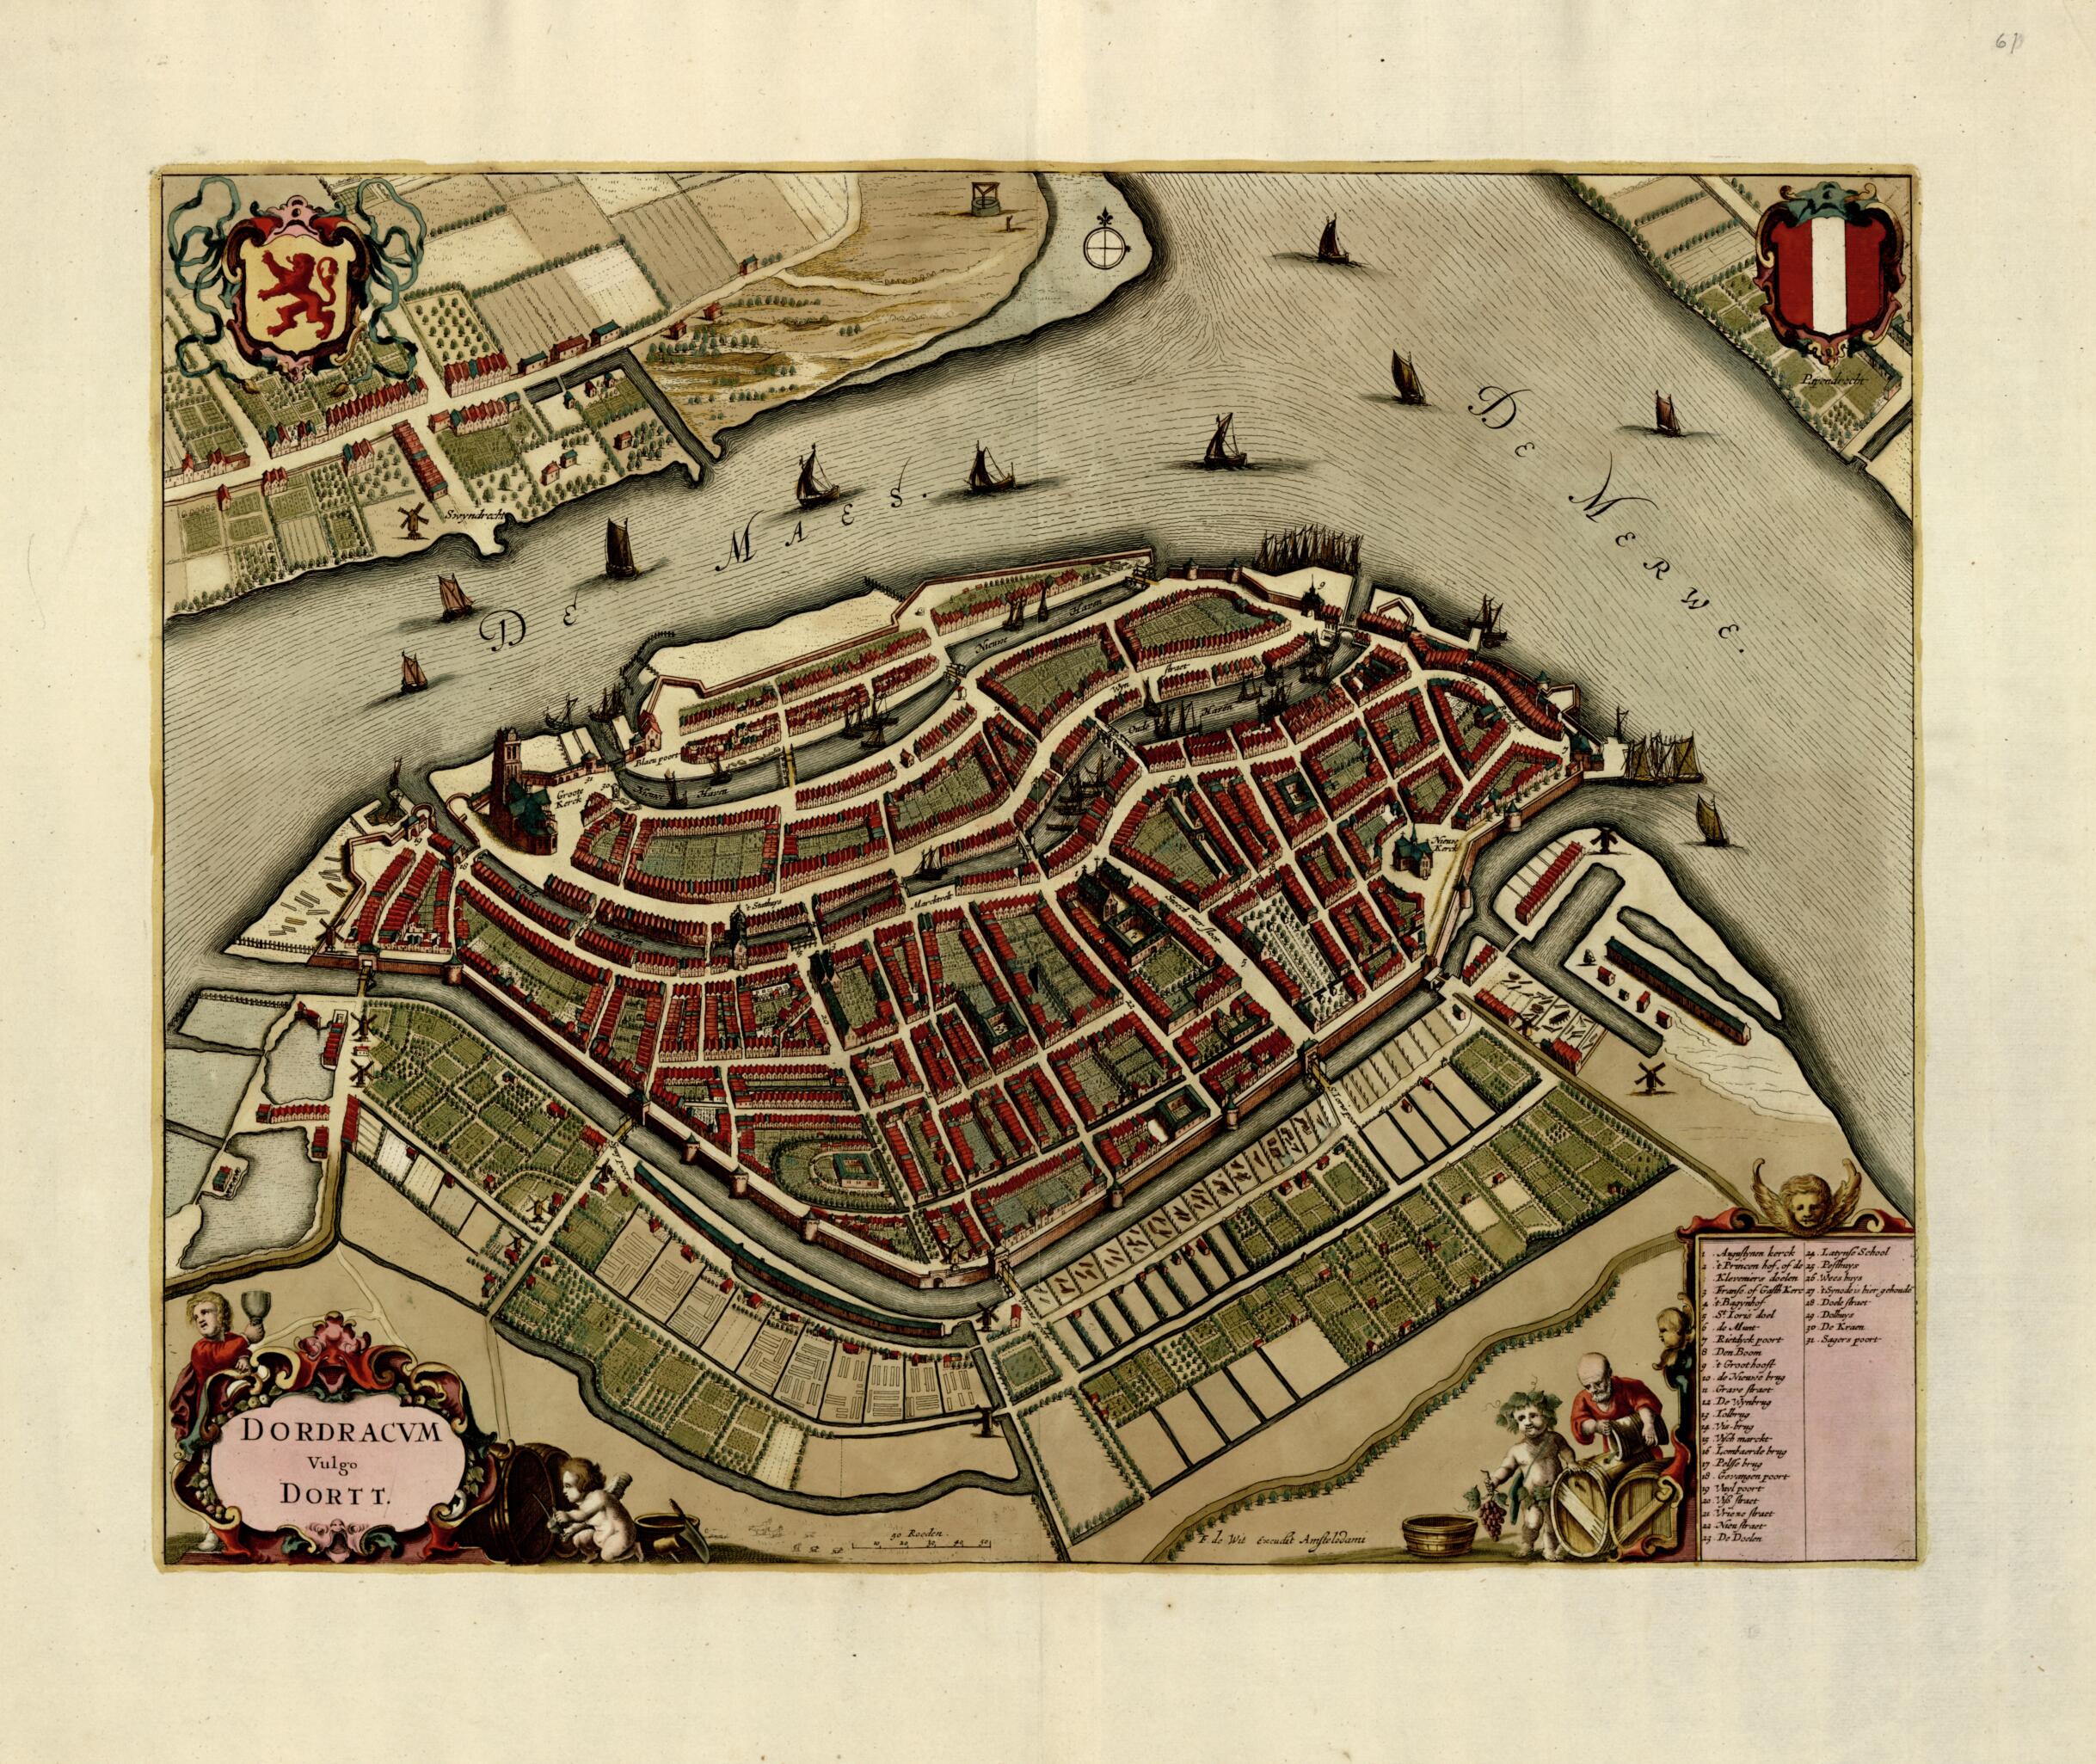 This old map of Dordracvm Vulgo Dortt from a Collection of Plans of Fortifications and Battles, 1684-from 1709 from 1709 was created by Anna Beeck in 1709